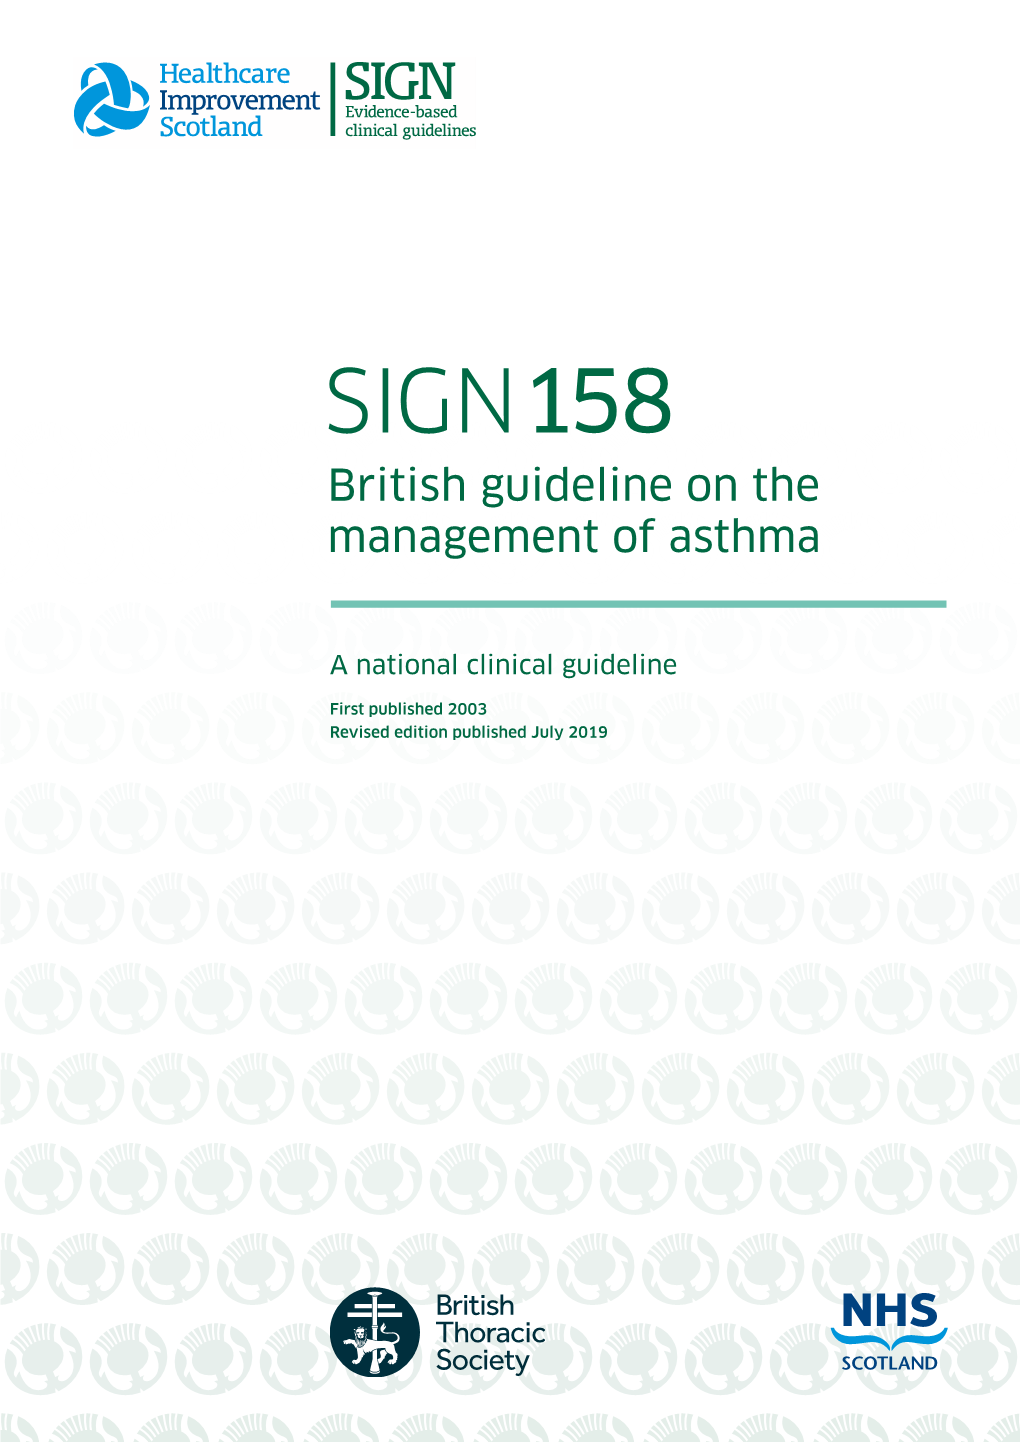 SIGN158 British Guideline on the Management of Asthma